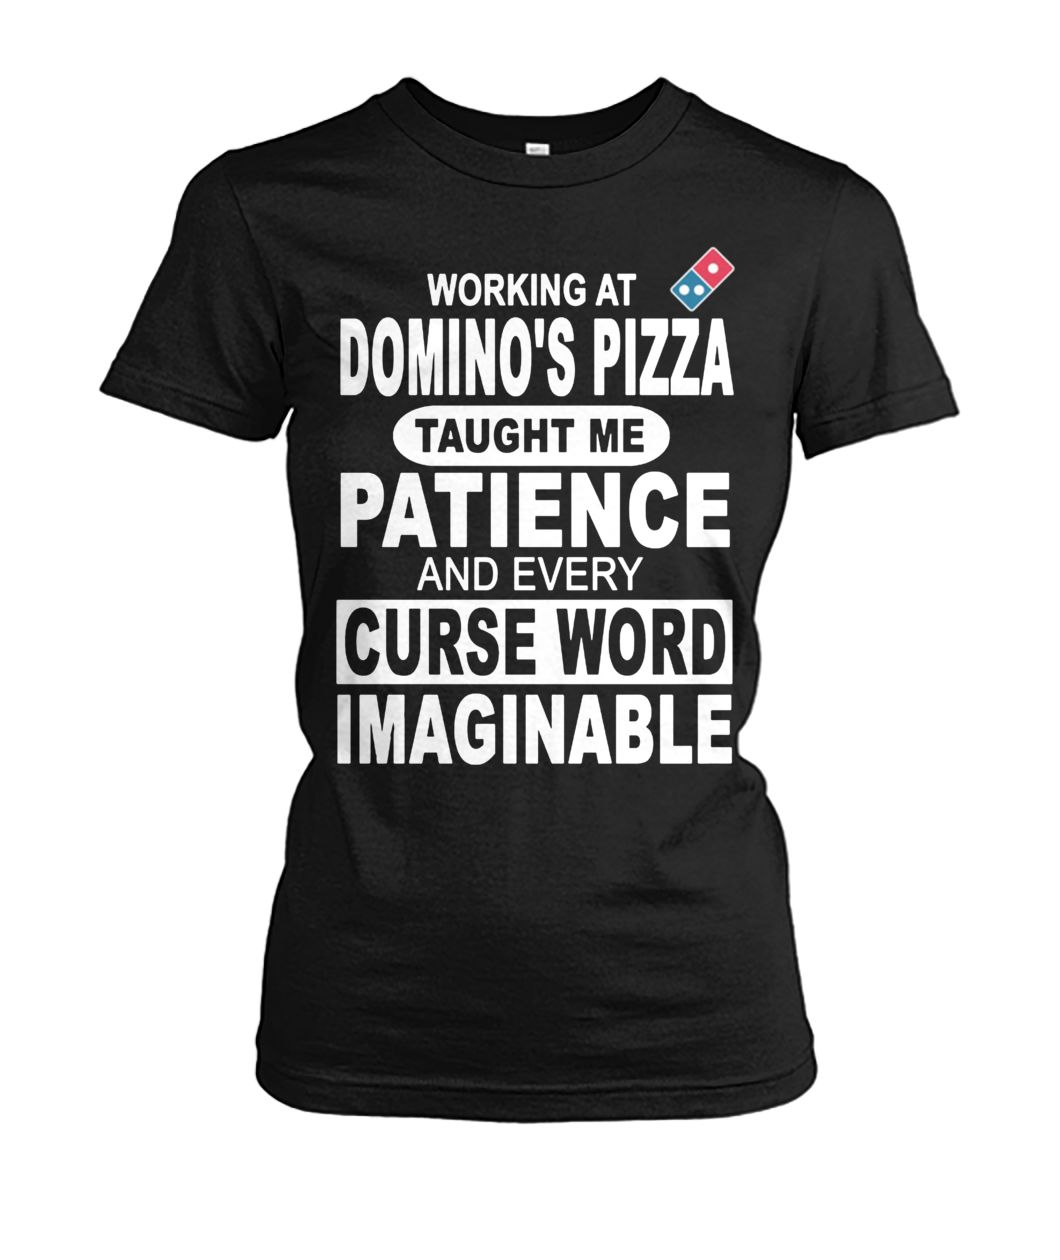 Working at domino's pizza taught me patience and curse word imaginable women's crew tee